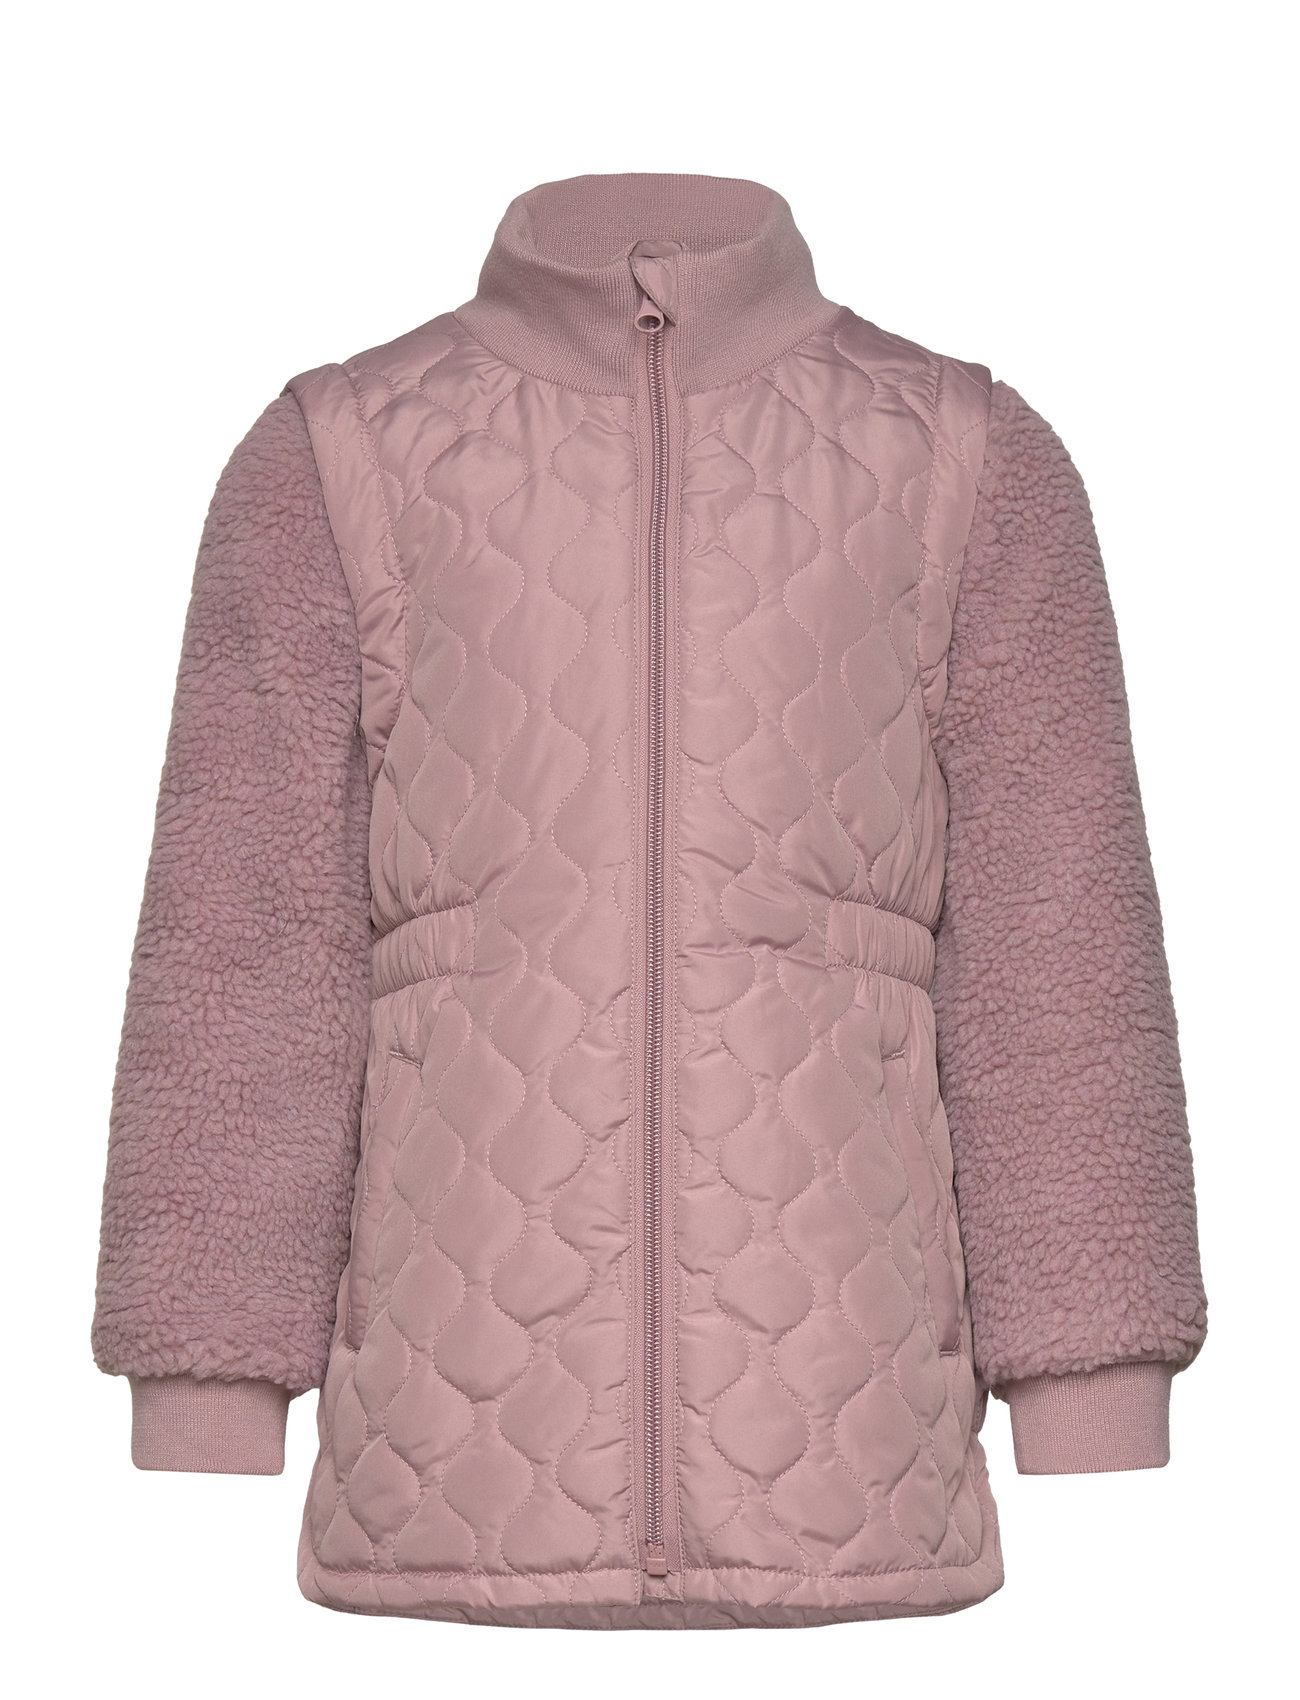 Nmfmember Quilt Jacket Tb Outerwear Jackets & Coats Quilted Jackets Pink Name It